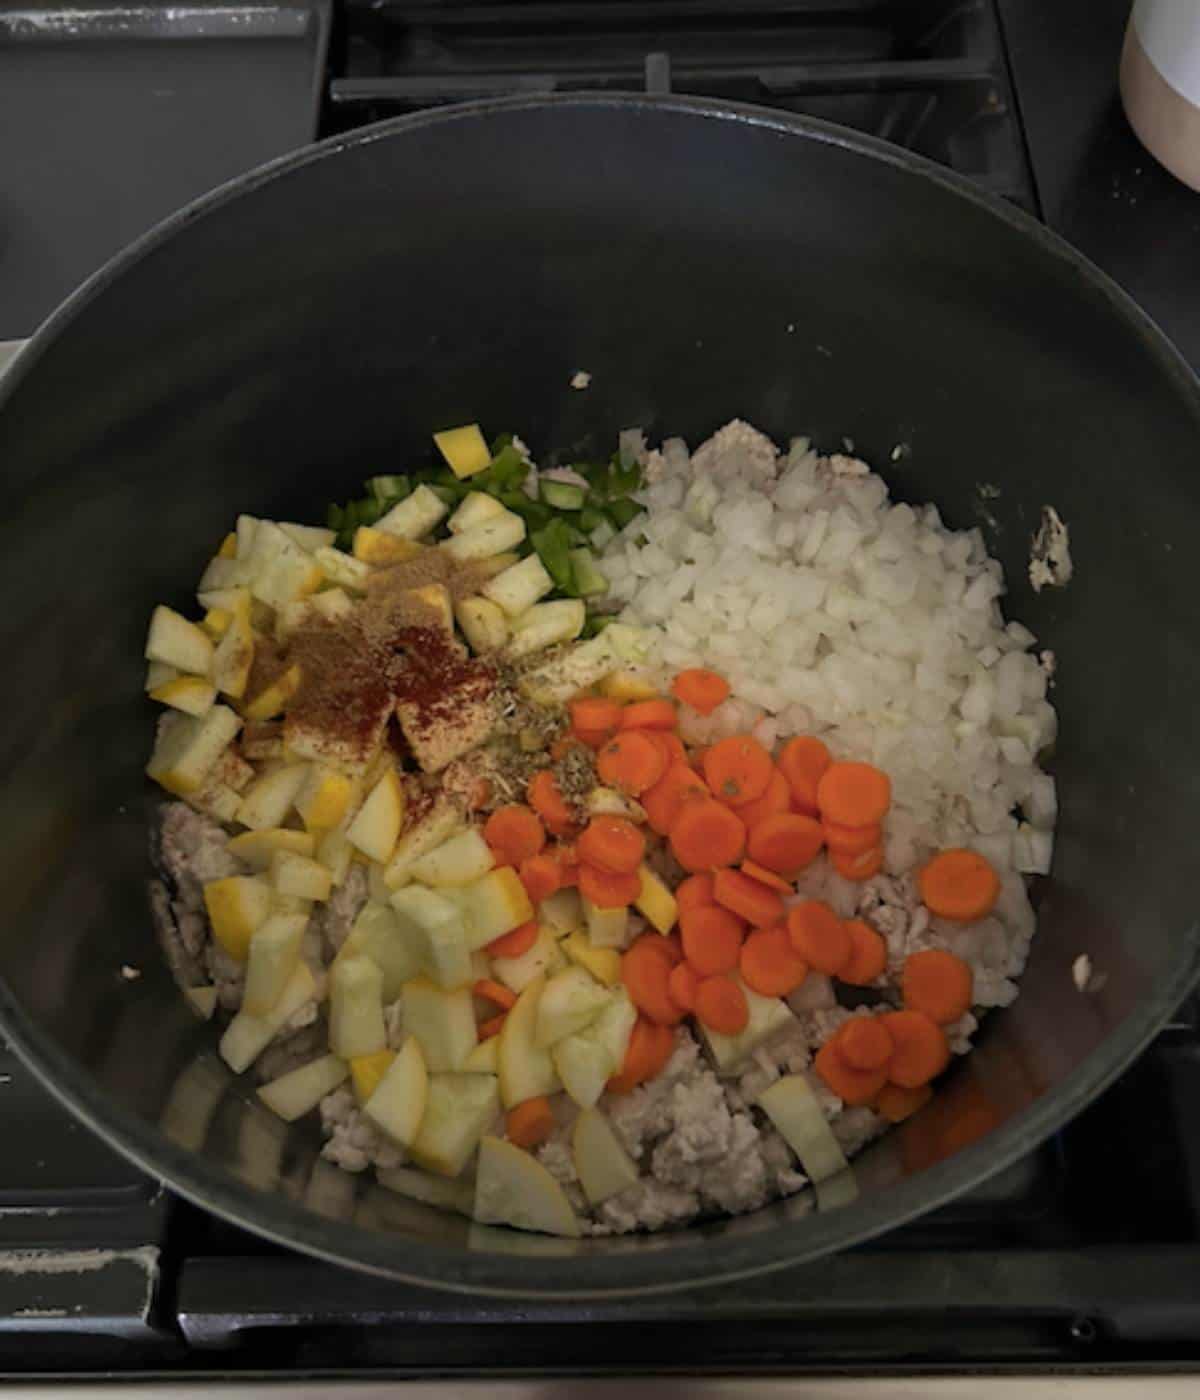 Turkey and vegetables in dutch oven.